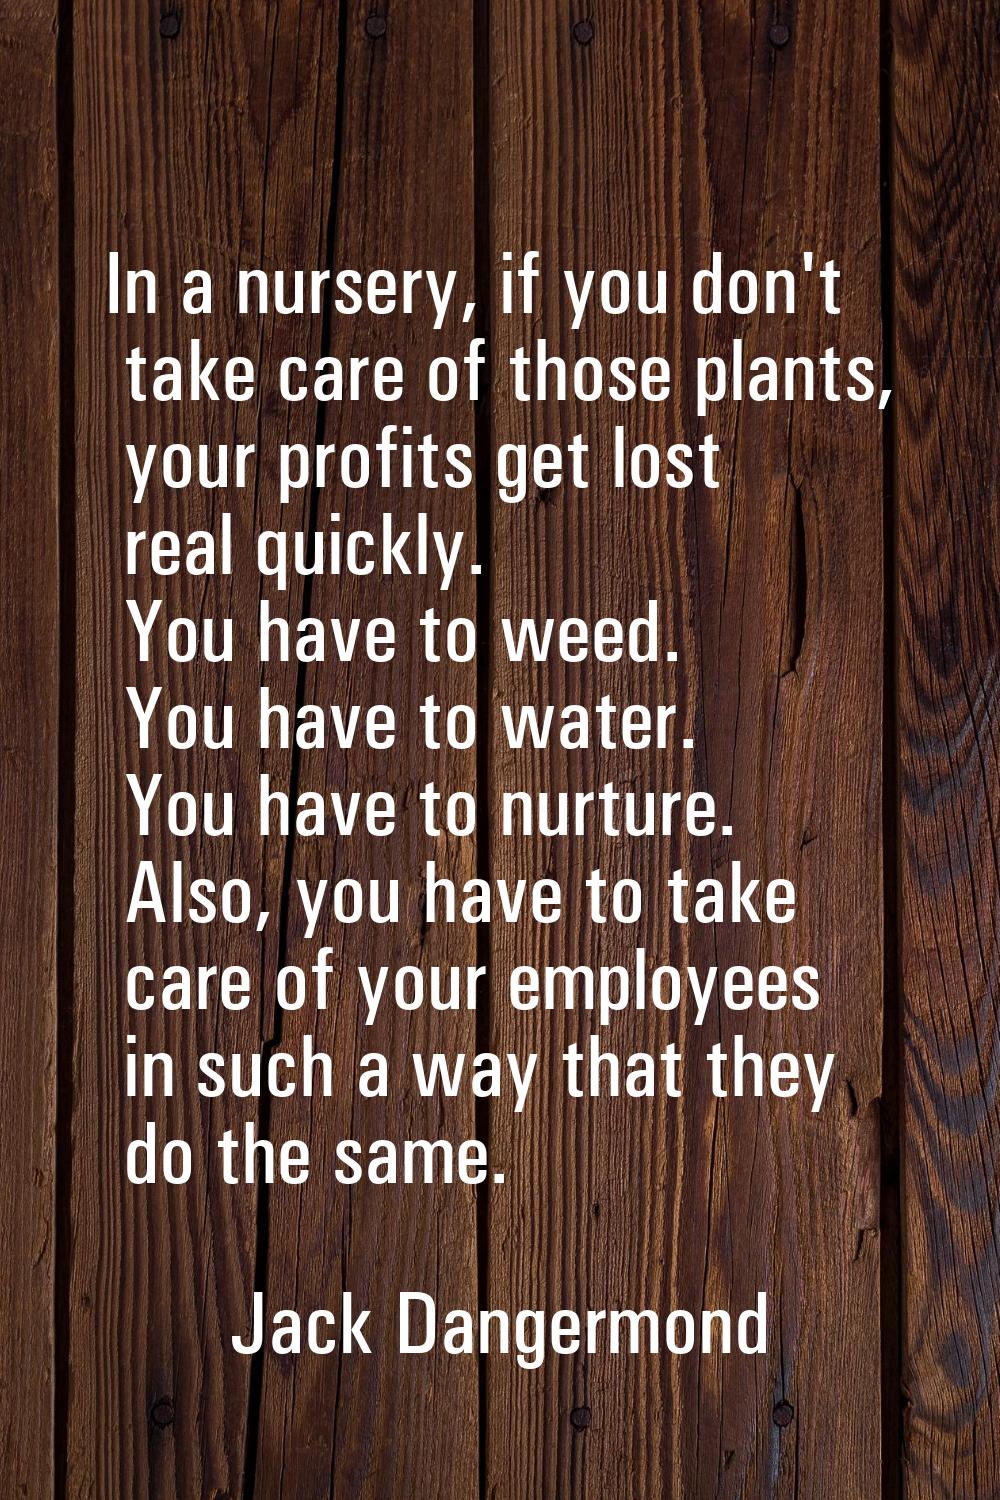 In a nursery, if you don't take care of those plants, your profits get lost real quickly. You have 